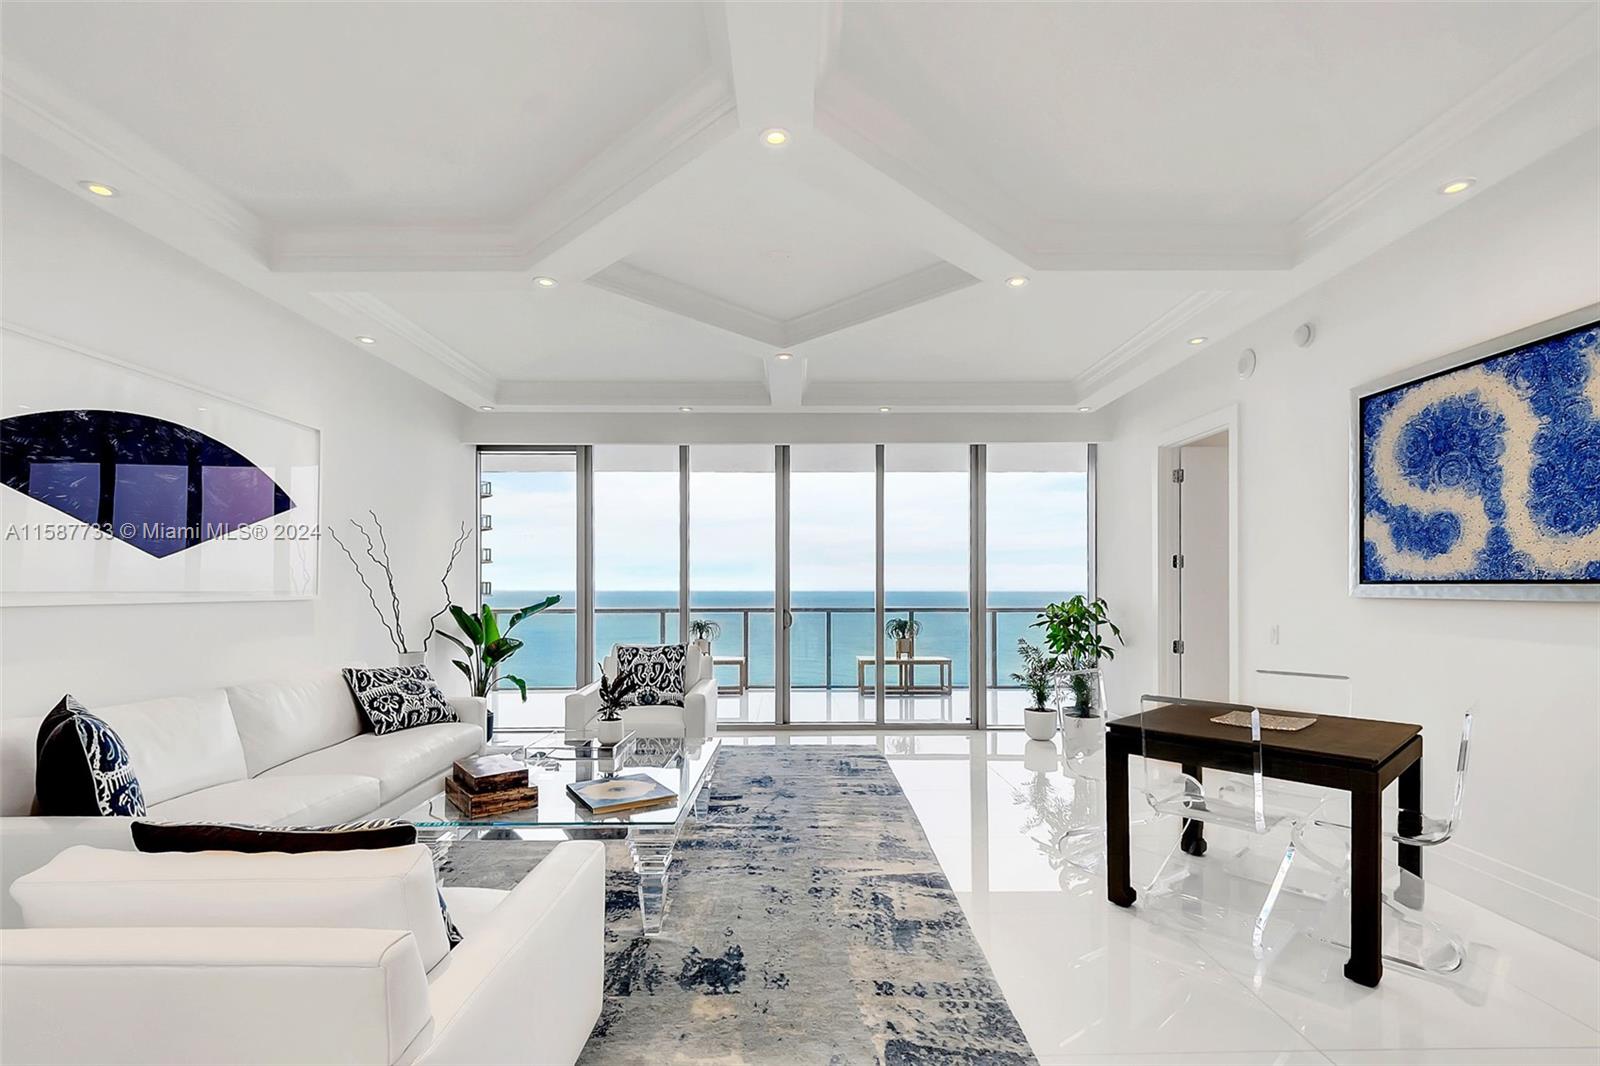 Gorgeous oceanfront residence in the St. Regis Bal Harbour. Spanning 3,128 sqft, this 3-bed, 3.5-bath residence showcases a well-appointed chef’s kitchen with top-tier Miele, Subzero, and Wolf appliances, a wine fridge, a spacious living room, a formal dining area, a comfortable family room, and an opulent master suite, ideal for families seeking a primary or secondary residence. The vast terraces present stunning sunrise vistas of the ocean and picturesque sunset scenes overlooking Biscayne Bay and the Miami skyline. Residents have access to exceptional 5-star amenities including: a spa, fitness center, pool, beach services, and round-the-clock concierge and security. Located just steps from the renowned Bal Harbour Shops, this unit promises a lavish lifestyle unlike any other.